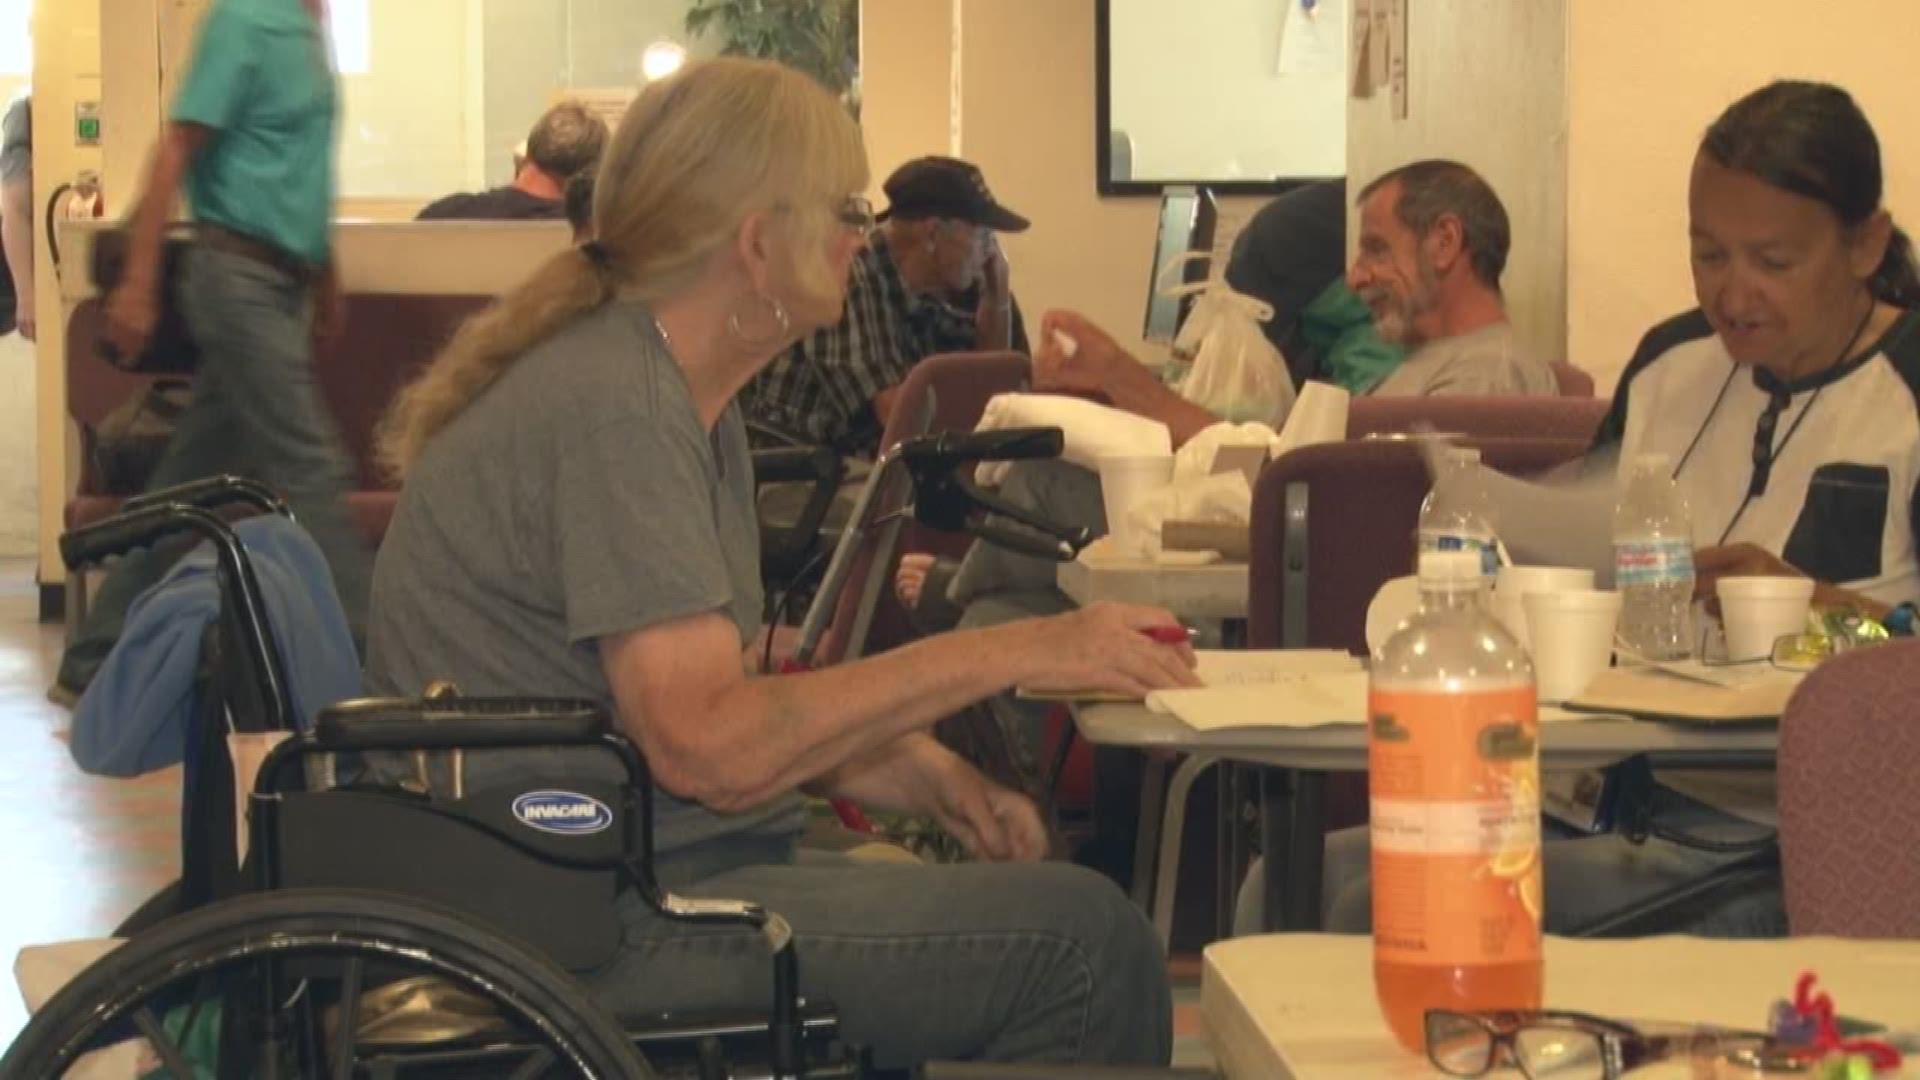 Justa Center is the only homeless center in the nations that helps seniors get back on their feet.